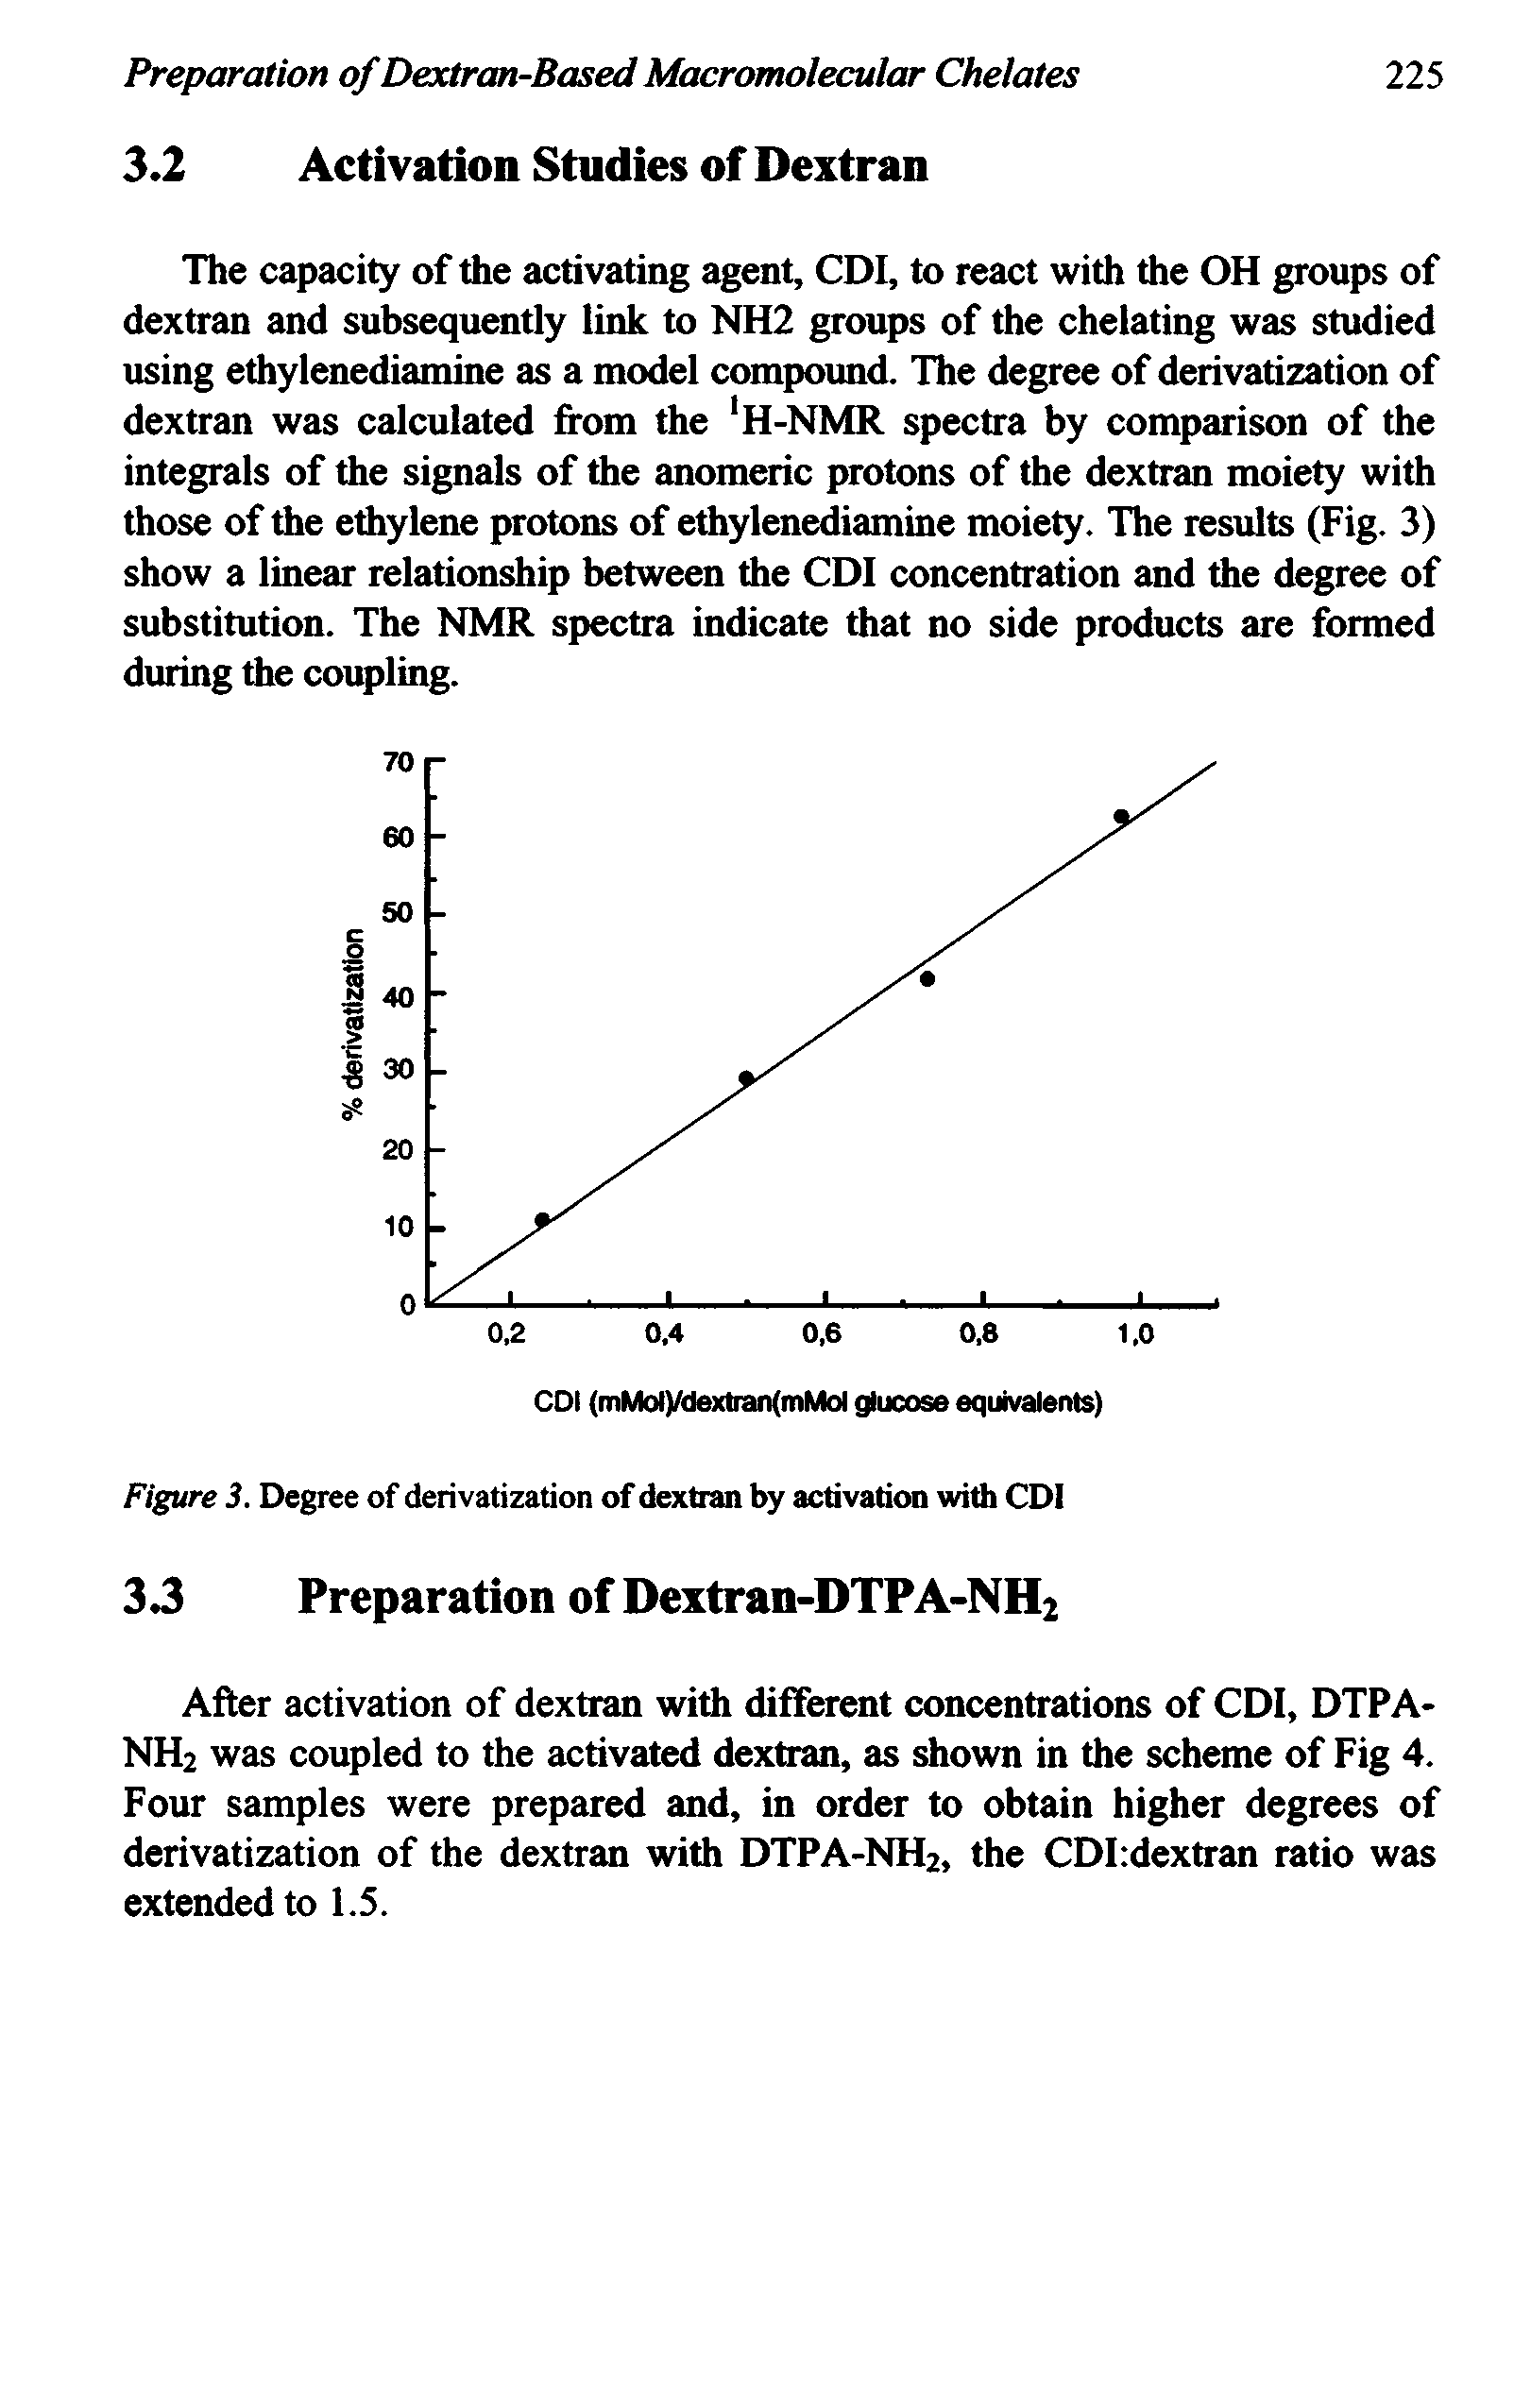 Figure 3. Degree of derivatization of dextran activation with CDI...